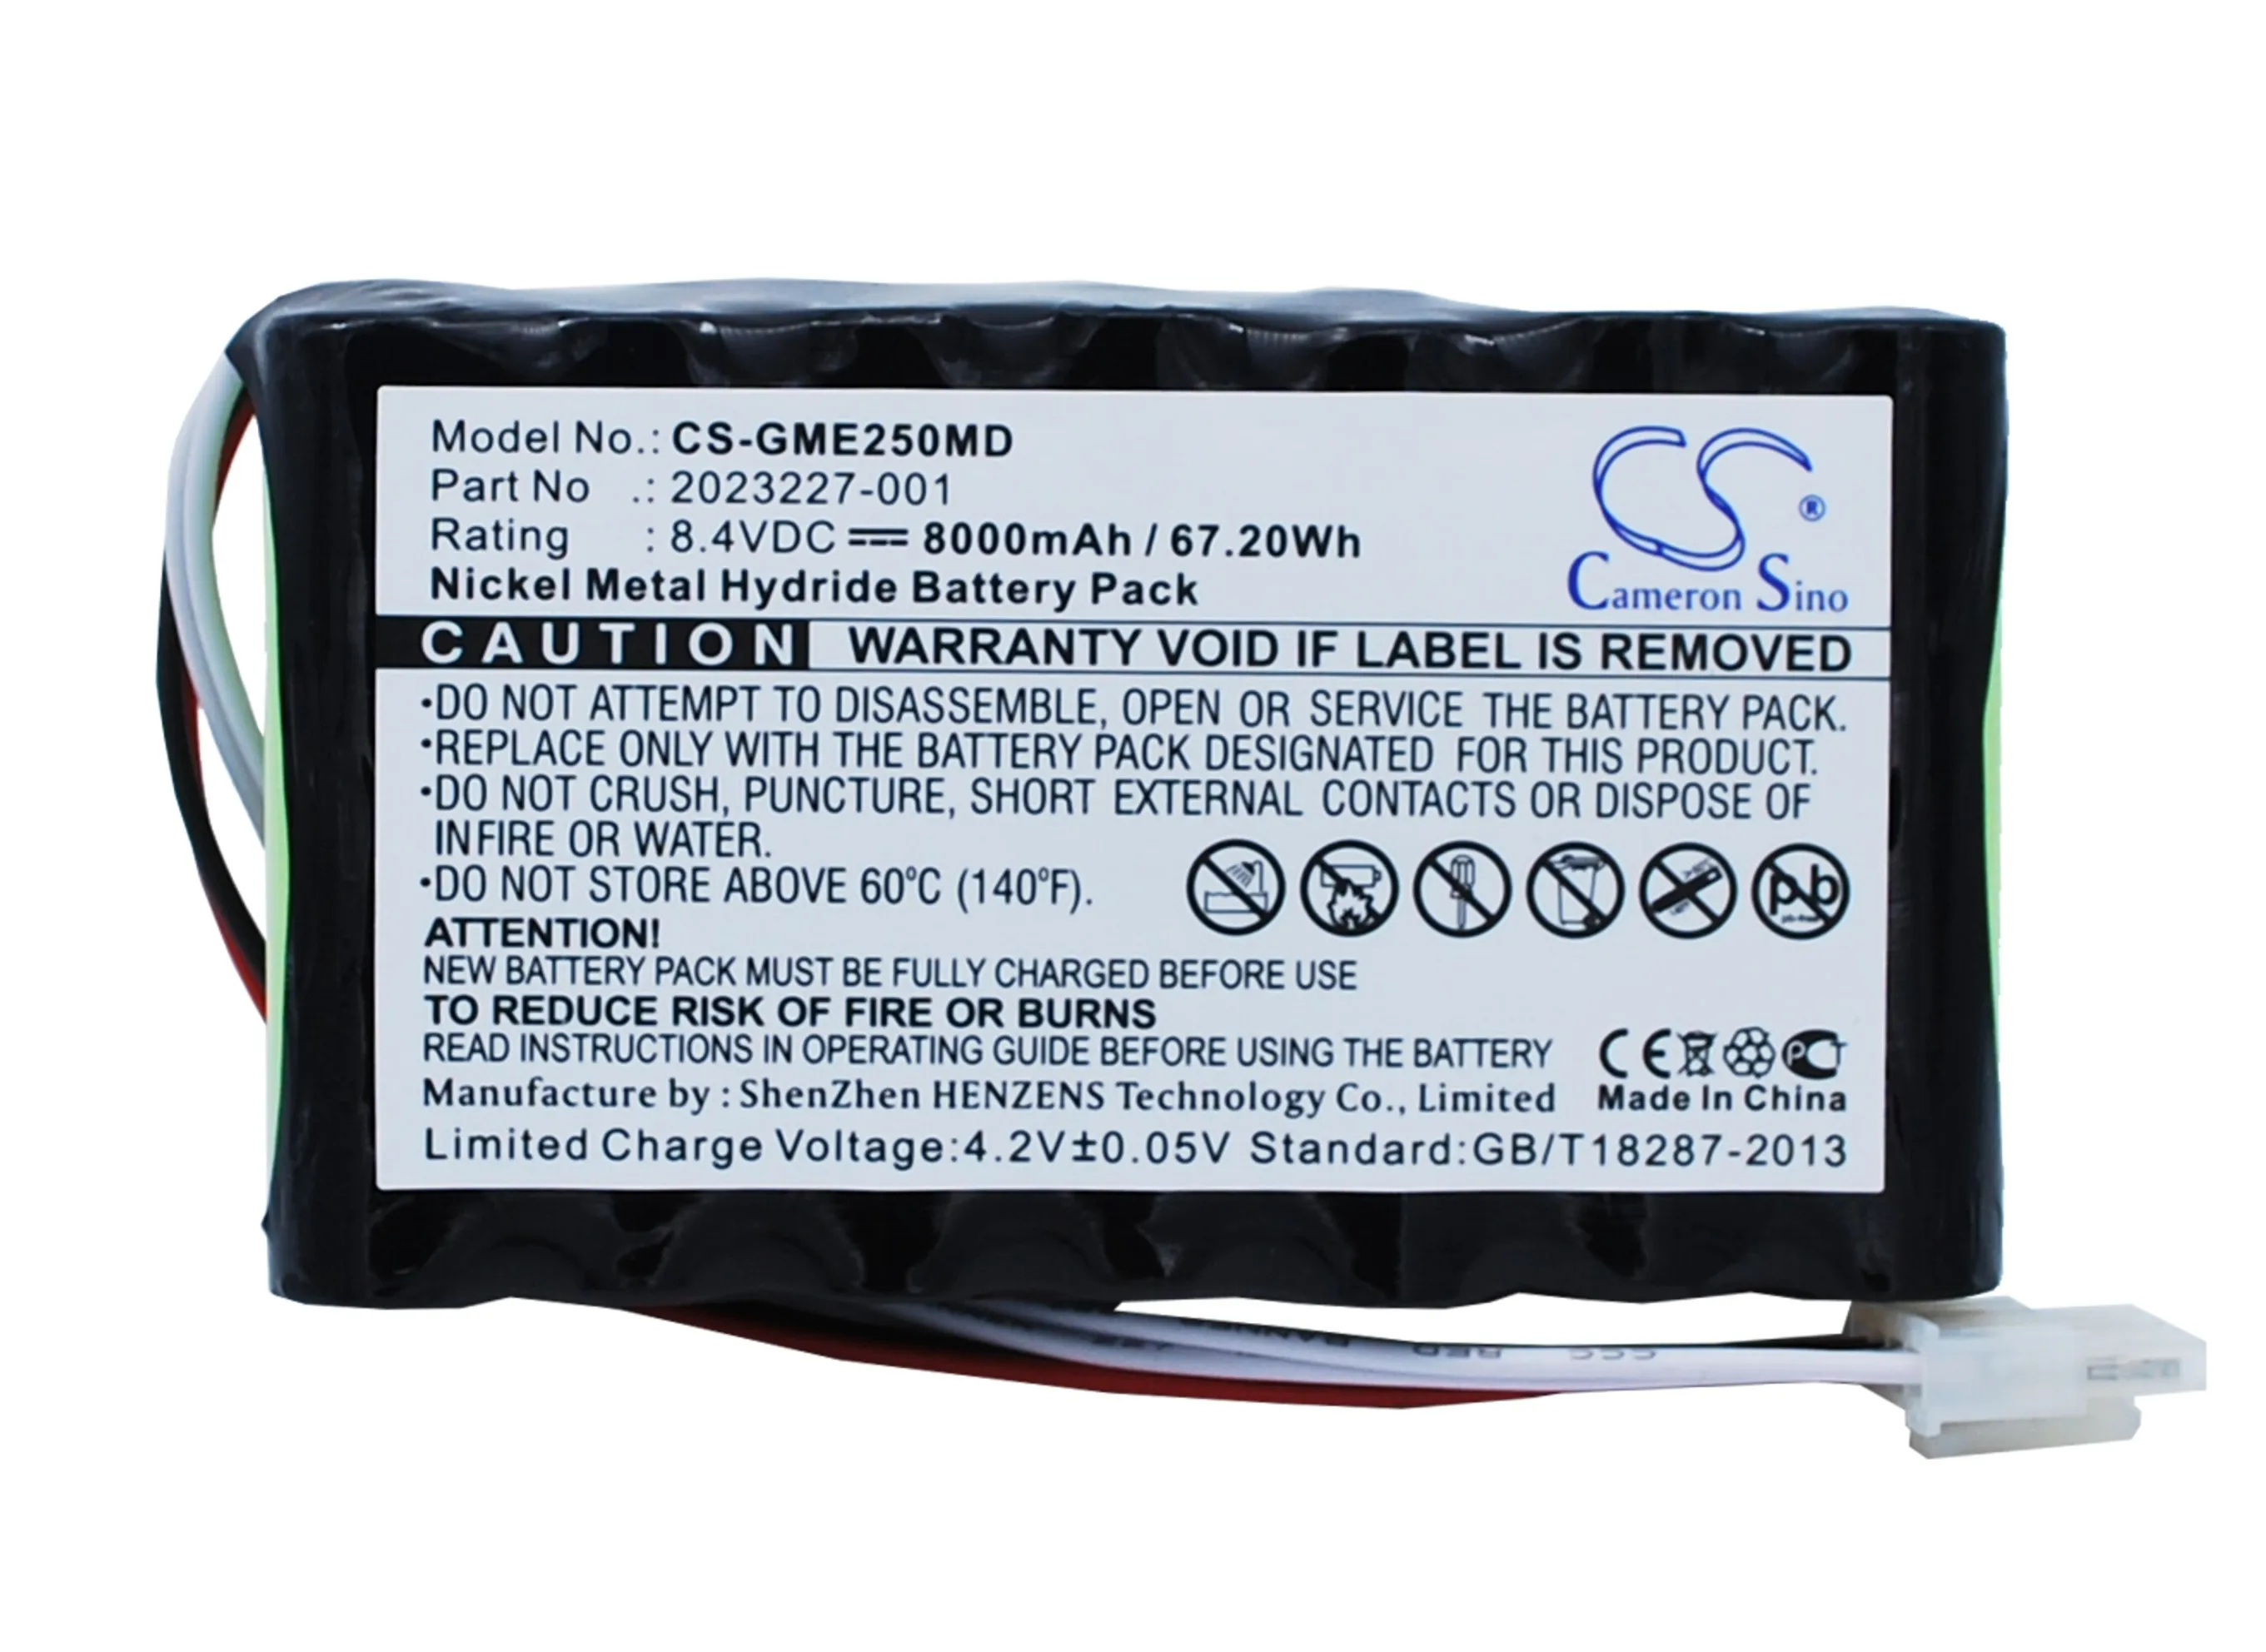 

CS 8000mAh / 67.20Wh battery for Hellige Marquette MD 2500, Monitor Dash 2500 2023227-001, 2023852-029